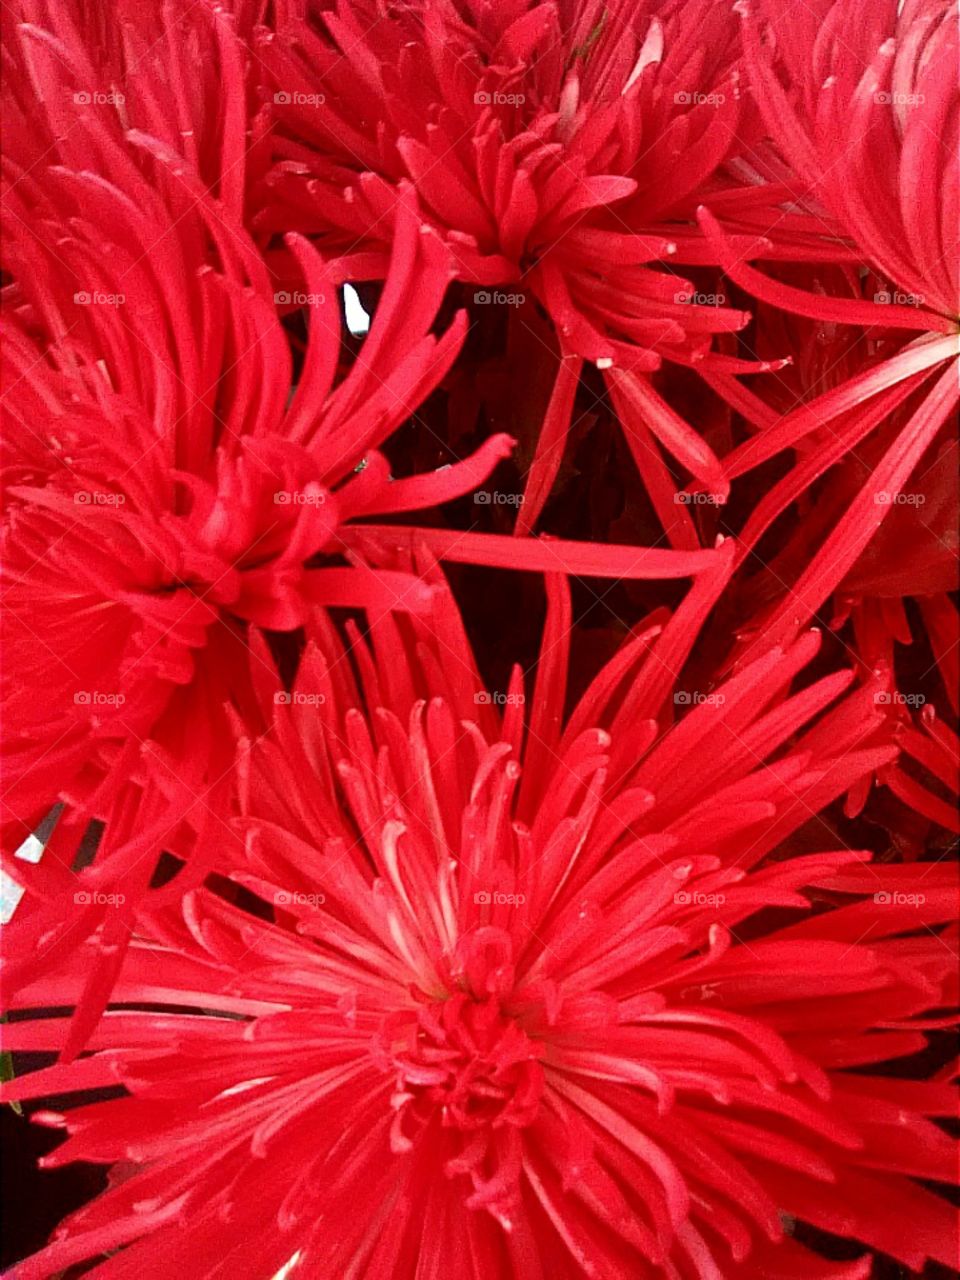 Bright Red Spikey Flowers